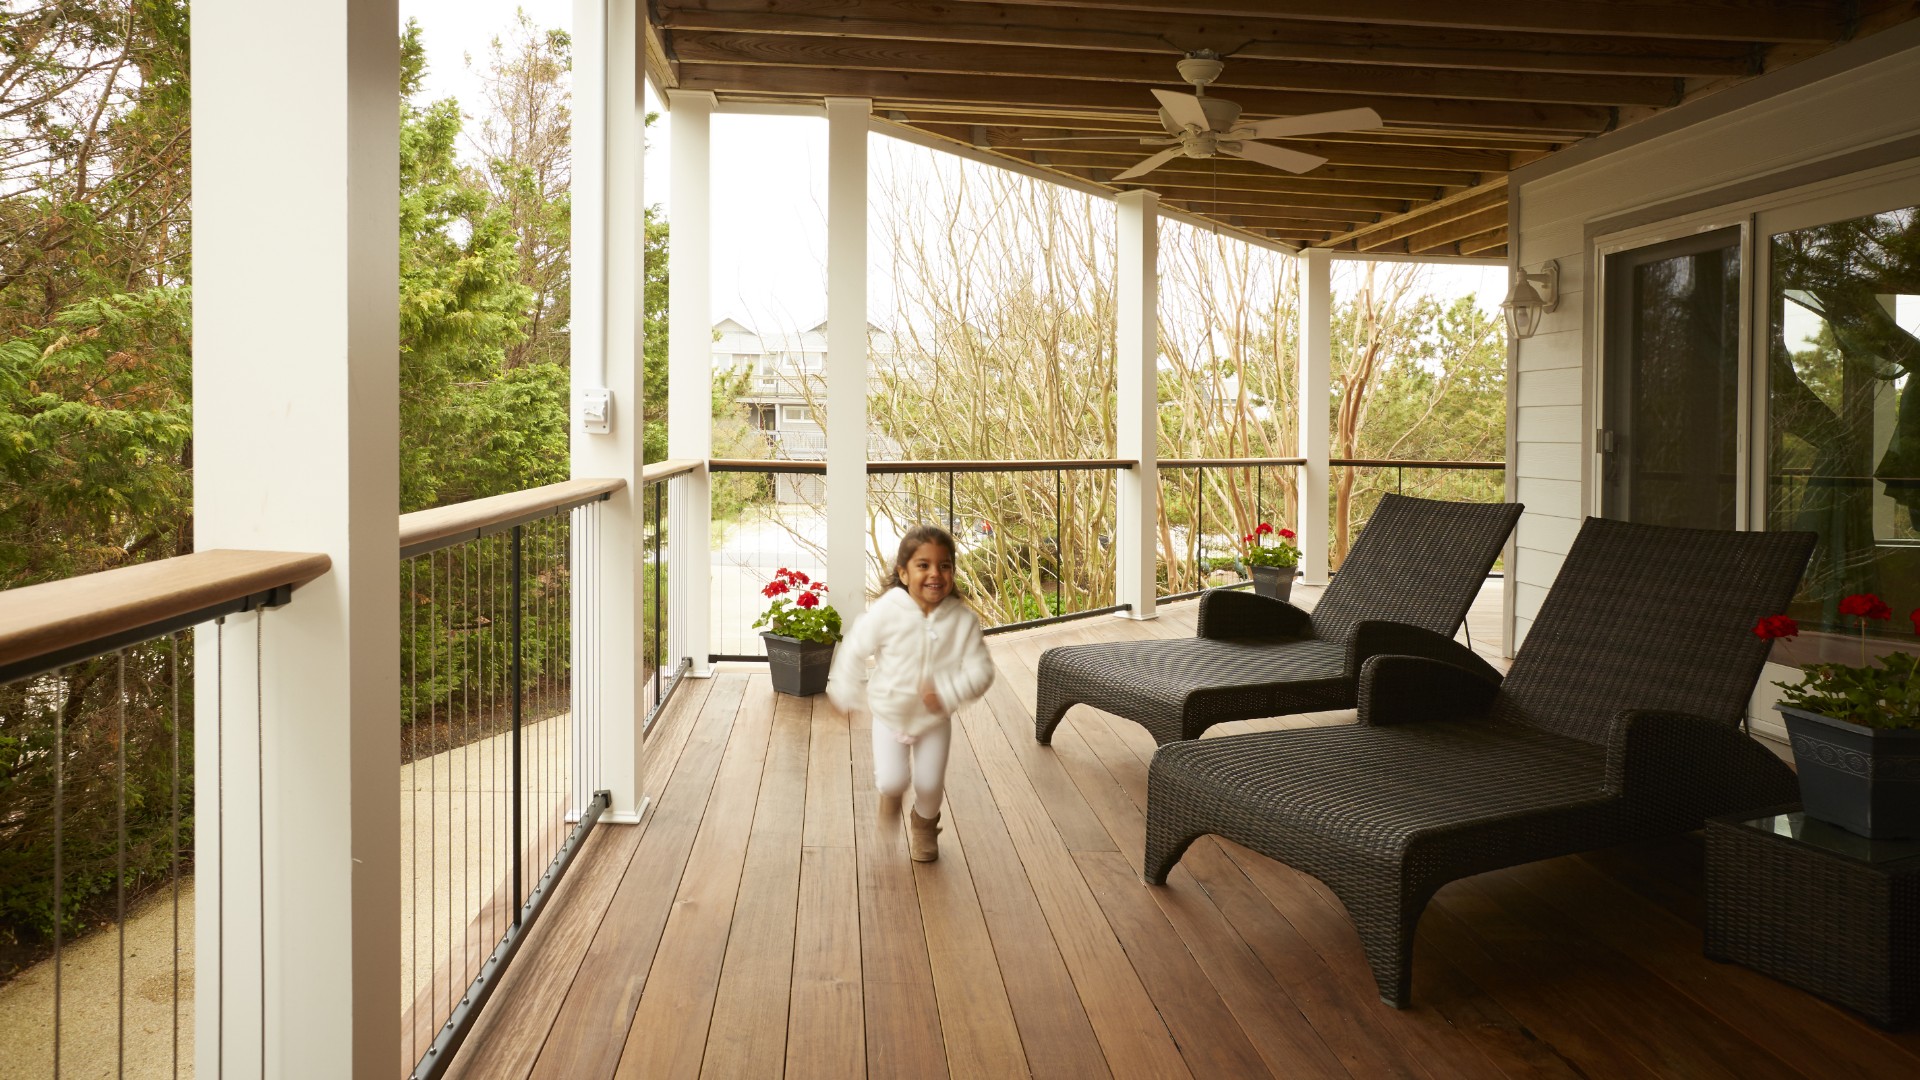 Child running on a wooden balcony with stylish railings and outdoor furniture.